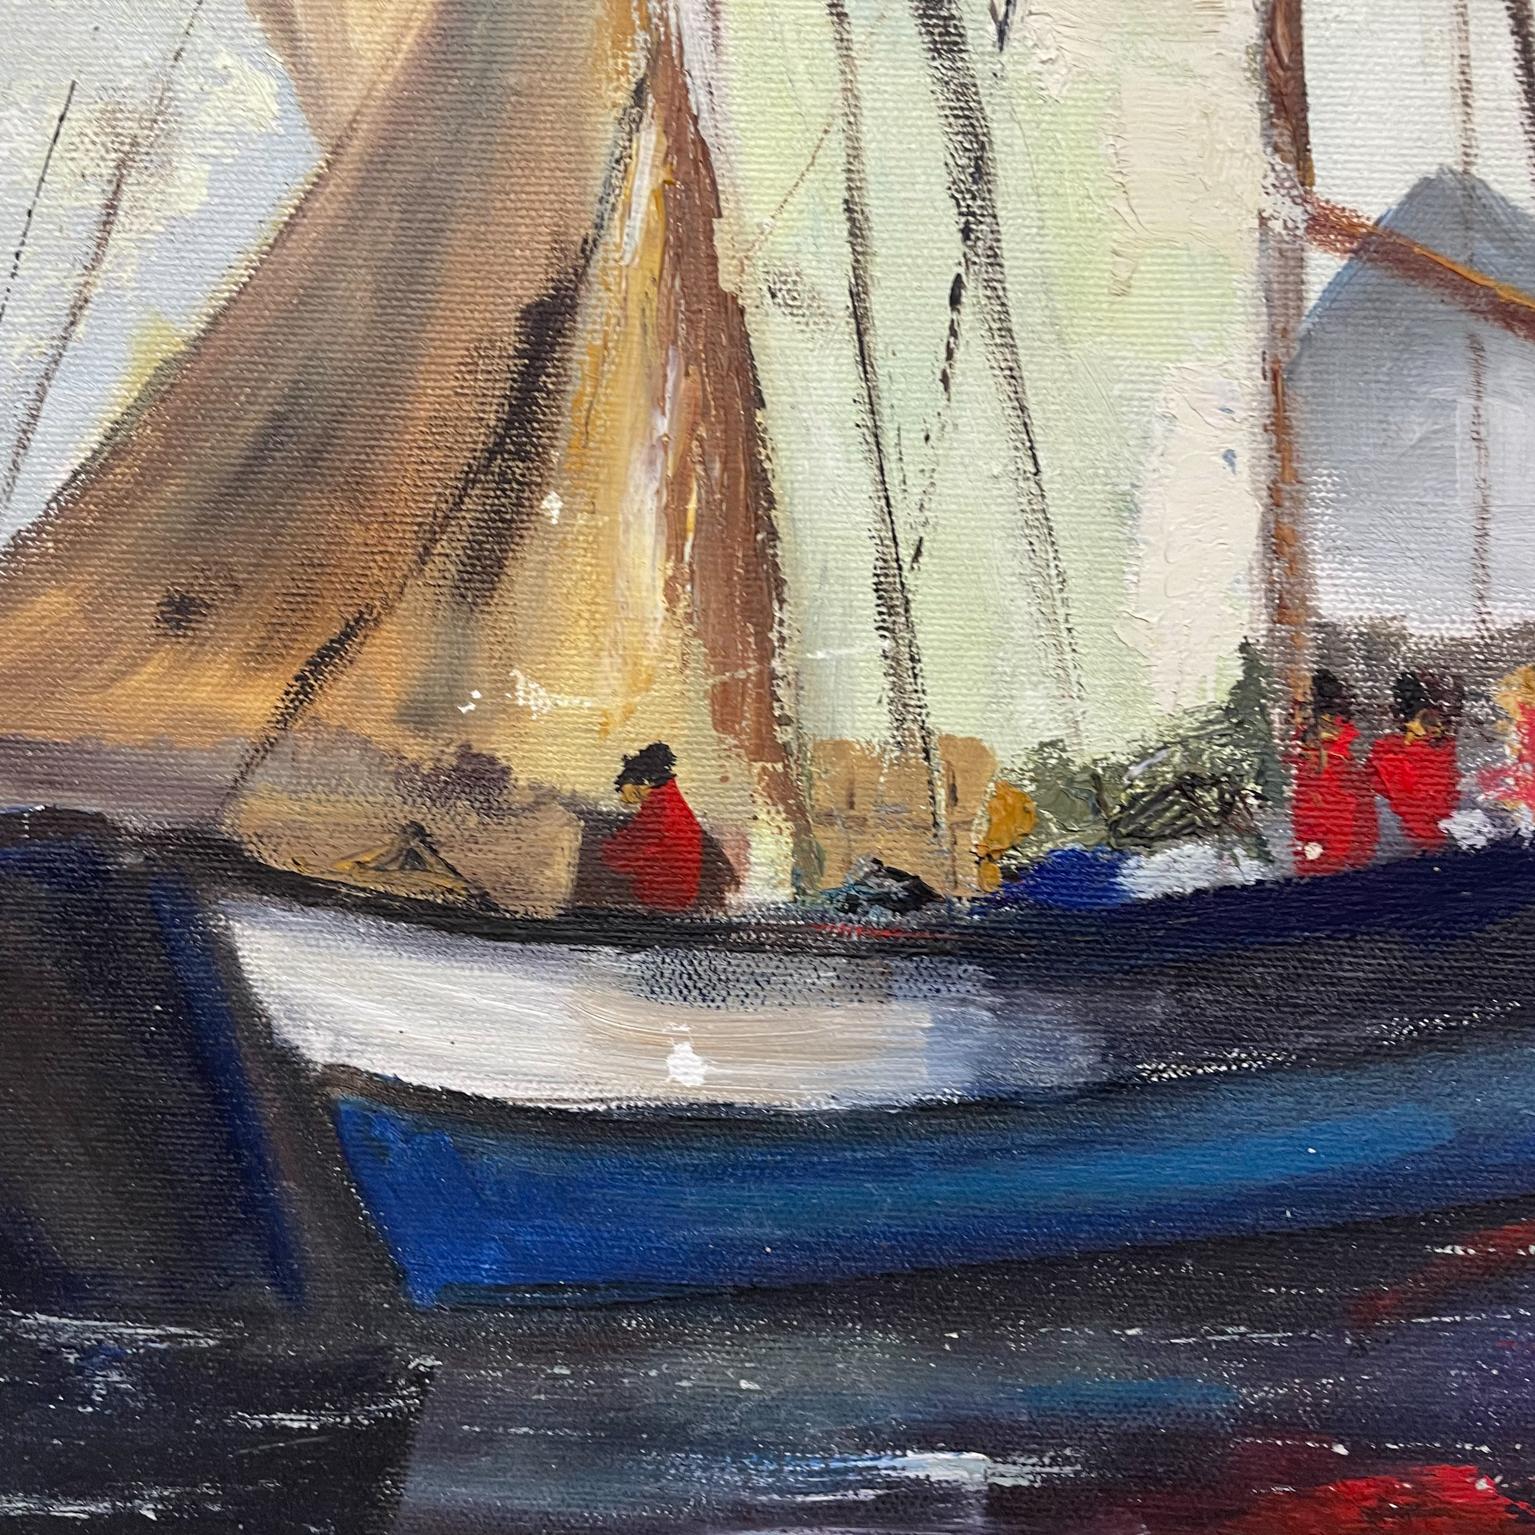 Late 20th Century Modern Sailboat Art Oil Painting on Canvas in Red White and Blue For Sale